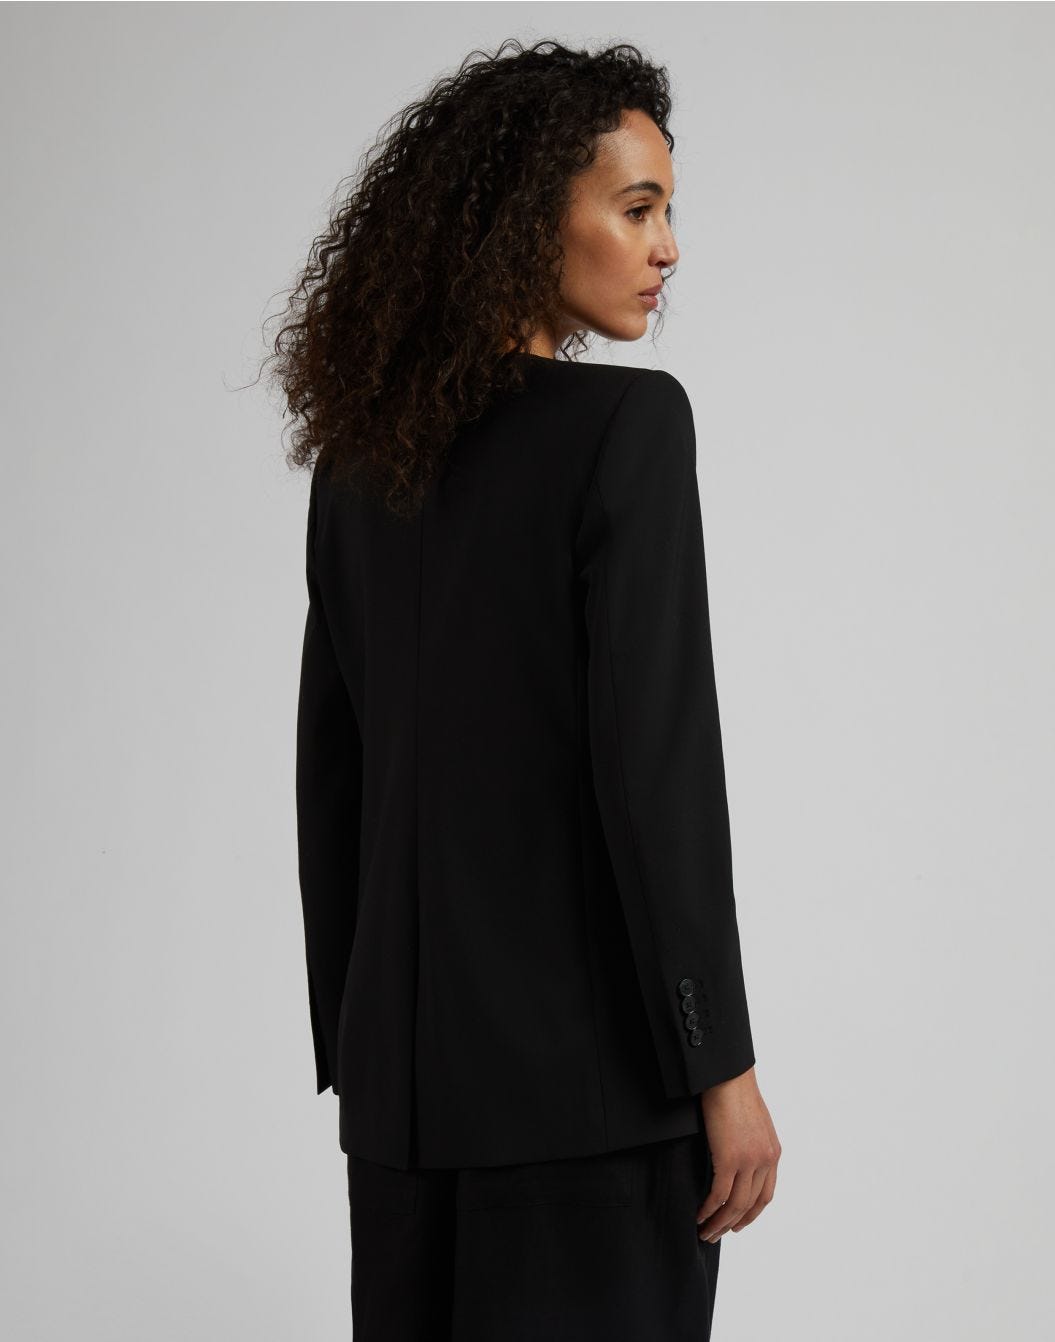 Black stretch wool cloth single-breasted collarless jacket